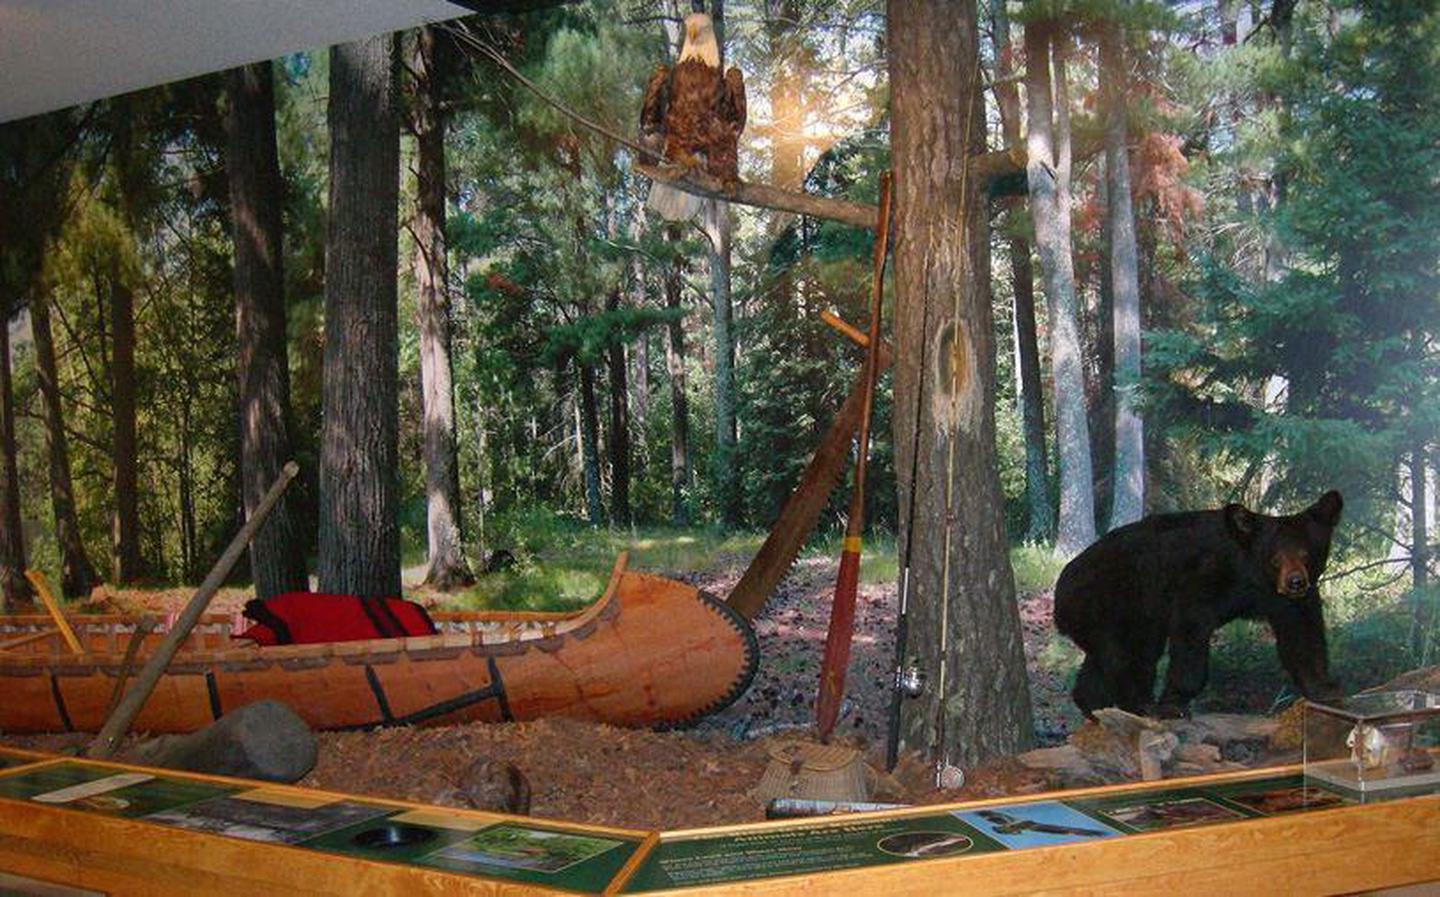 Canoe Bear ExhibitThe Namekagon River Visitor Center has exhibits of scenes from the river.